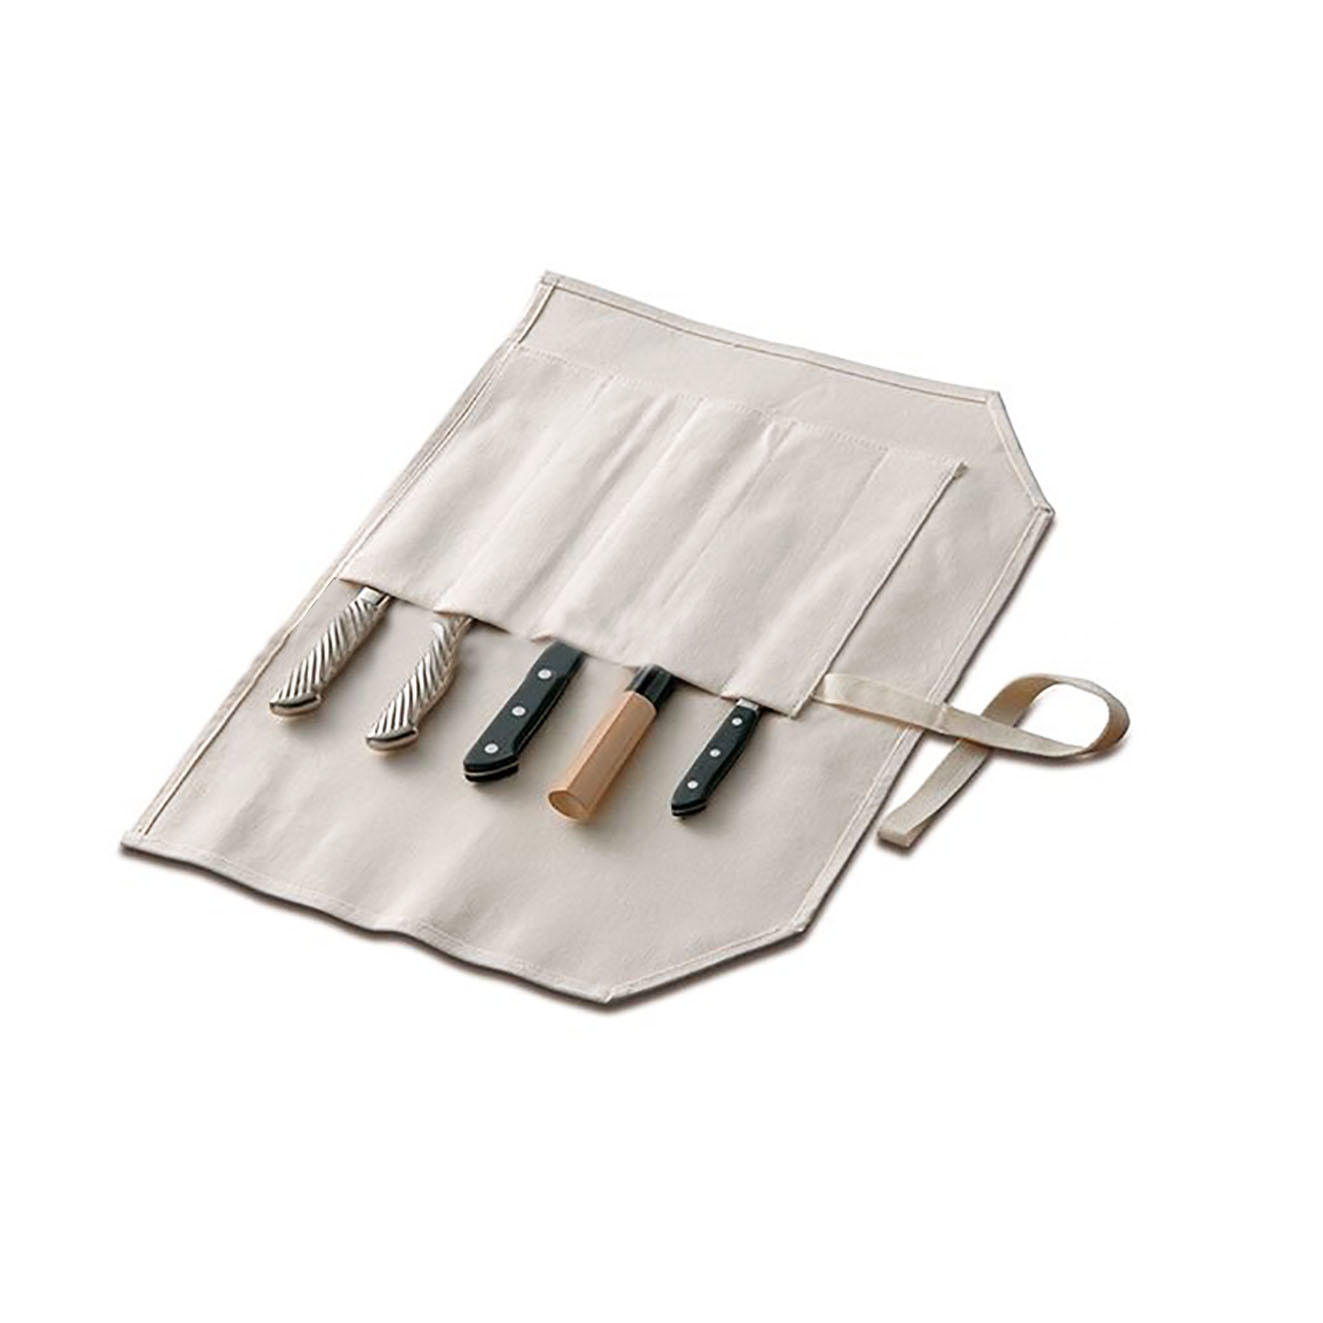 Roll-up cutlery bag with 100% cotton